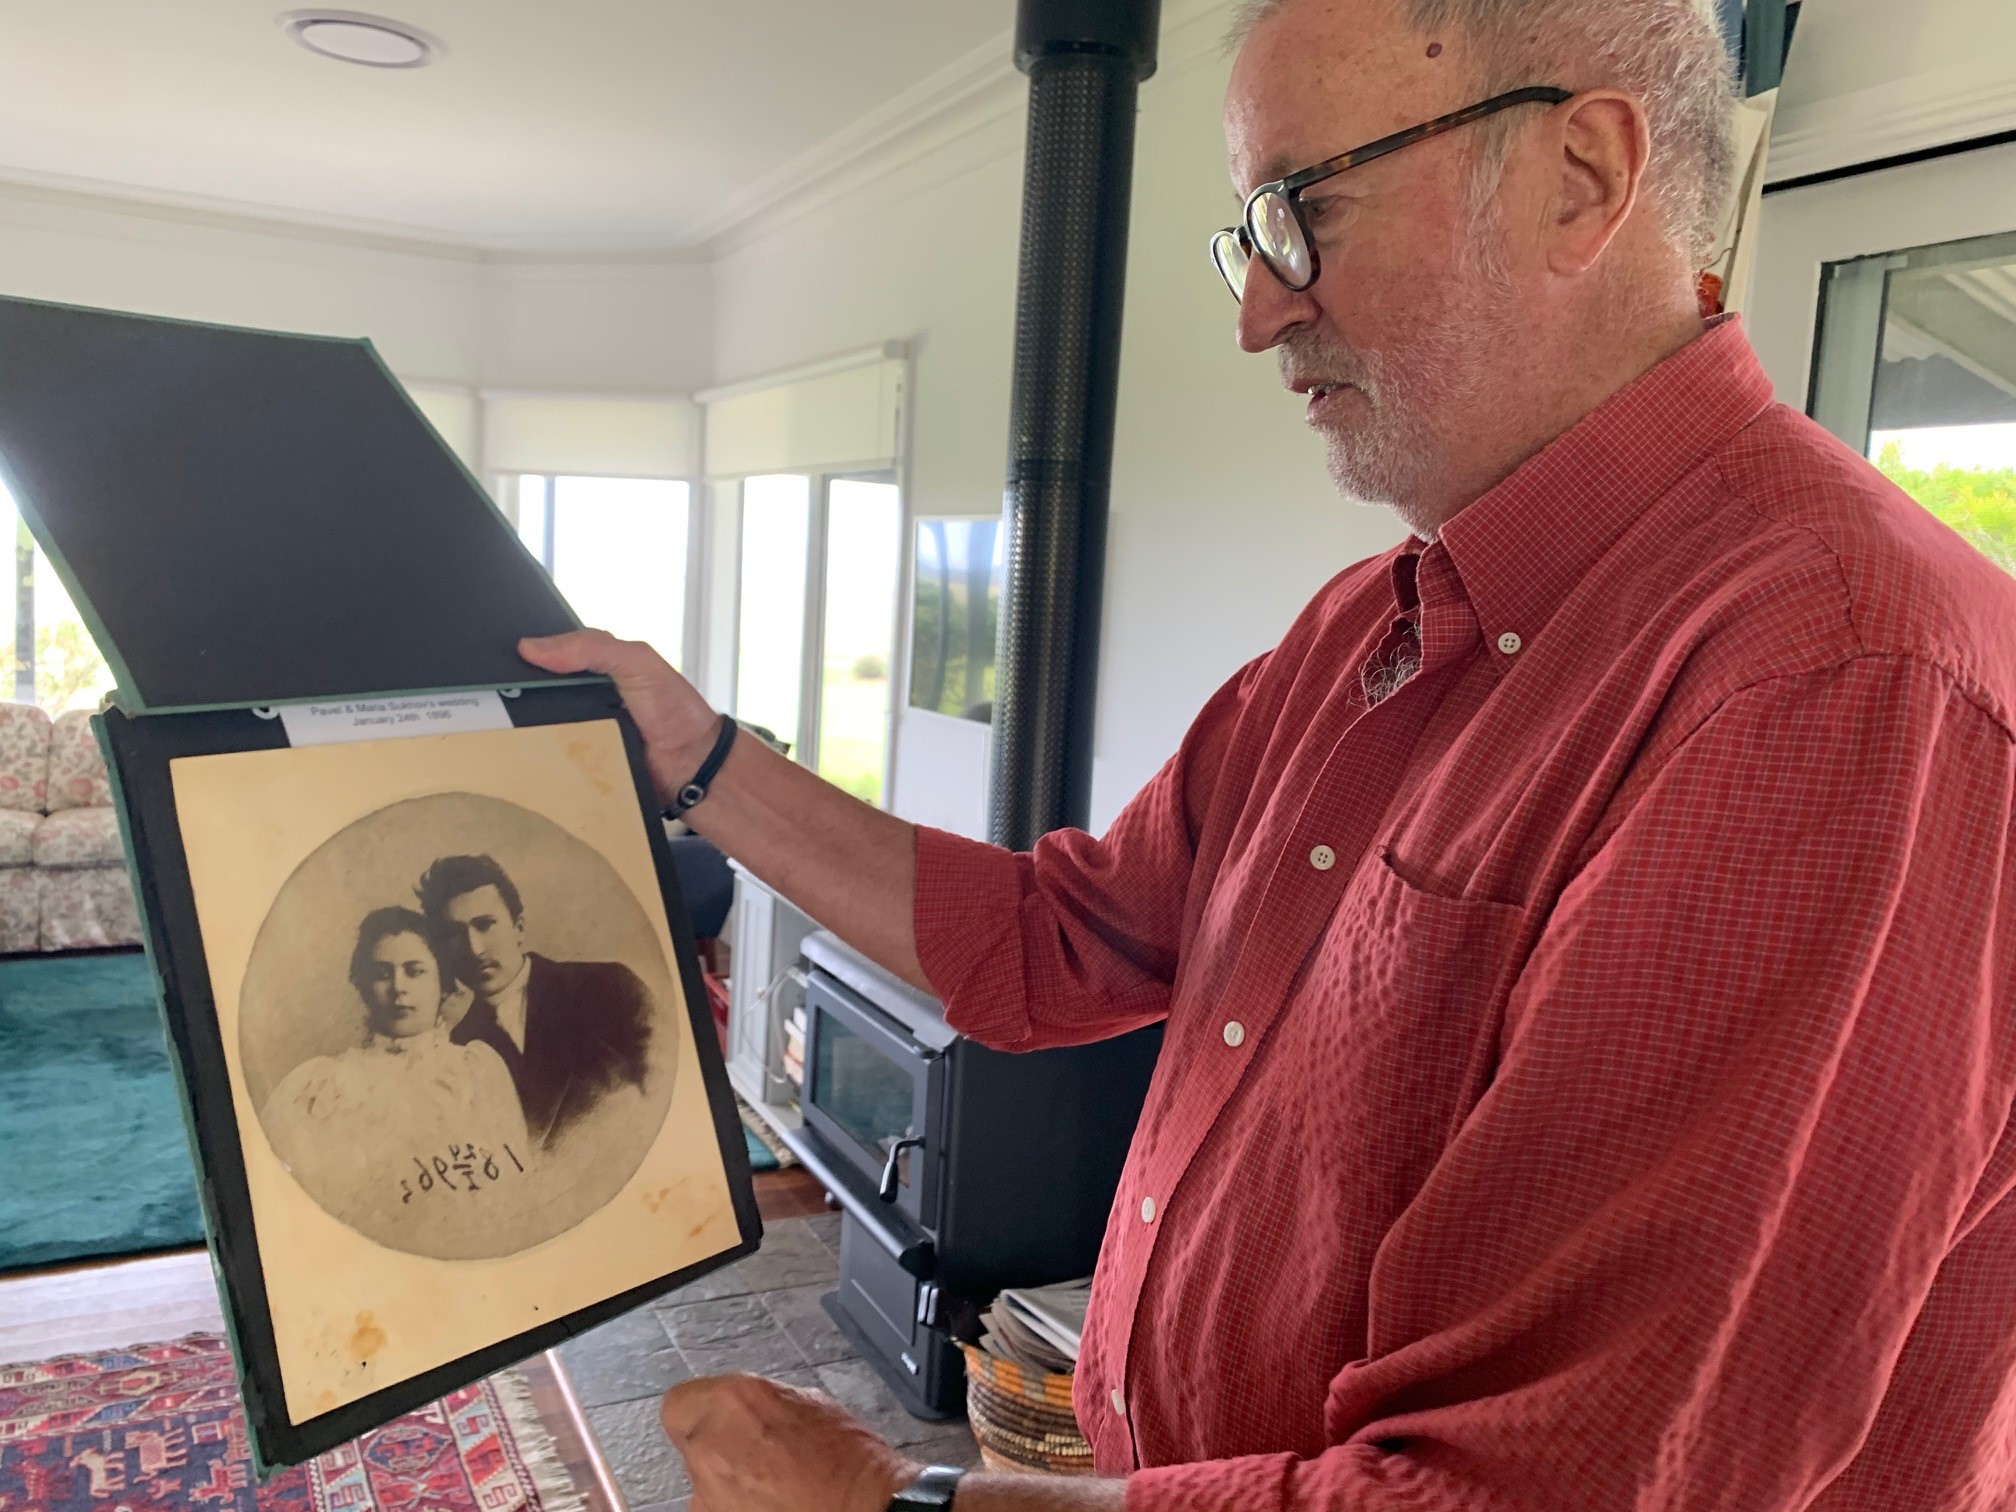 Man in red shirt holds an old photo in a black frame at arms length and appears to study it.